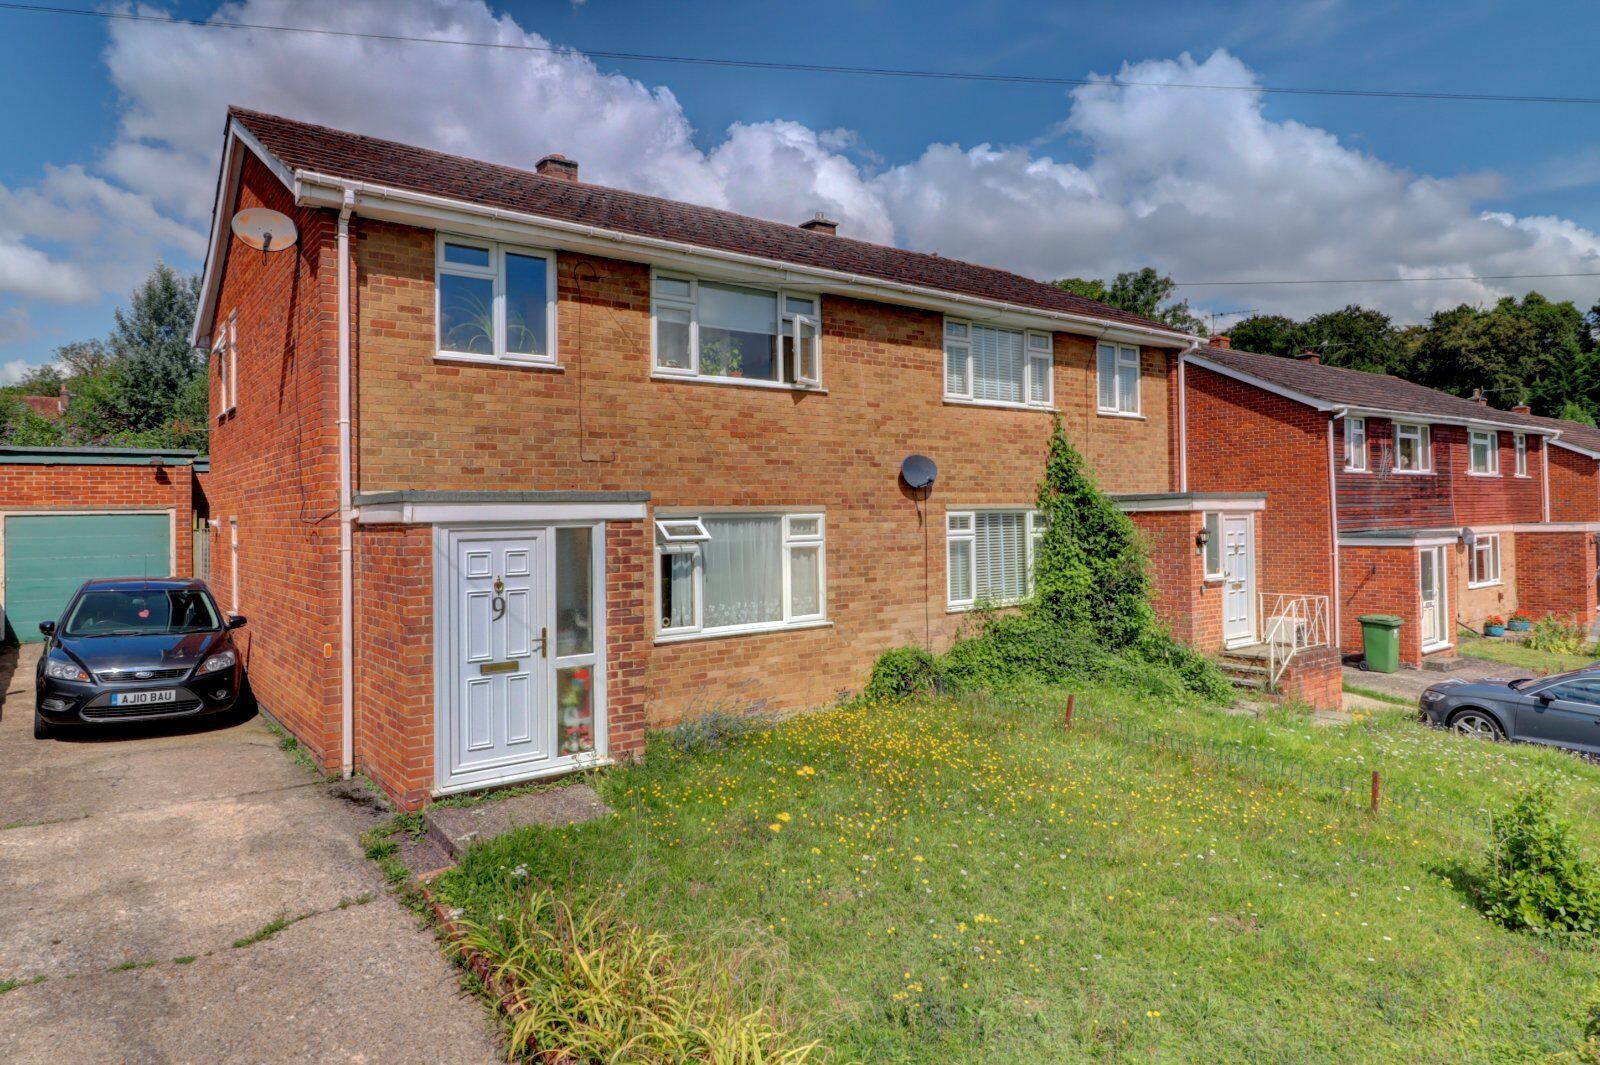 3 bedroom semi detached house for sale Leas Close, High Wycombe, HP13, main image